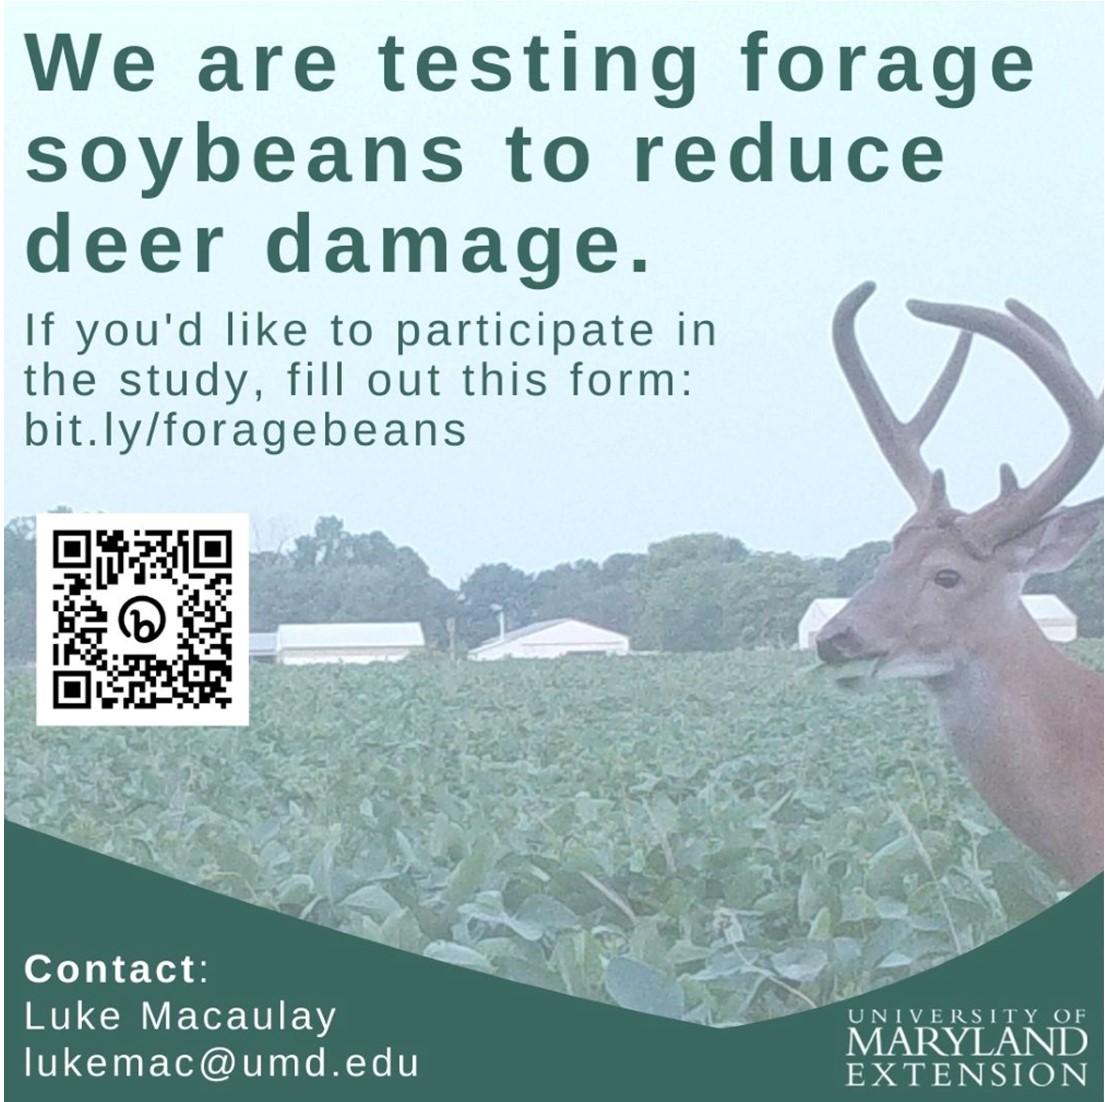 Advertisment-testing forage soybeans to reduce deer damage. Looking for participants for the study by going to bit.ly/foragebeans